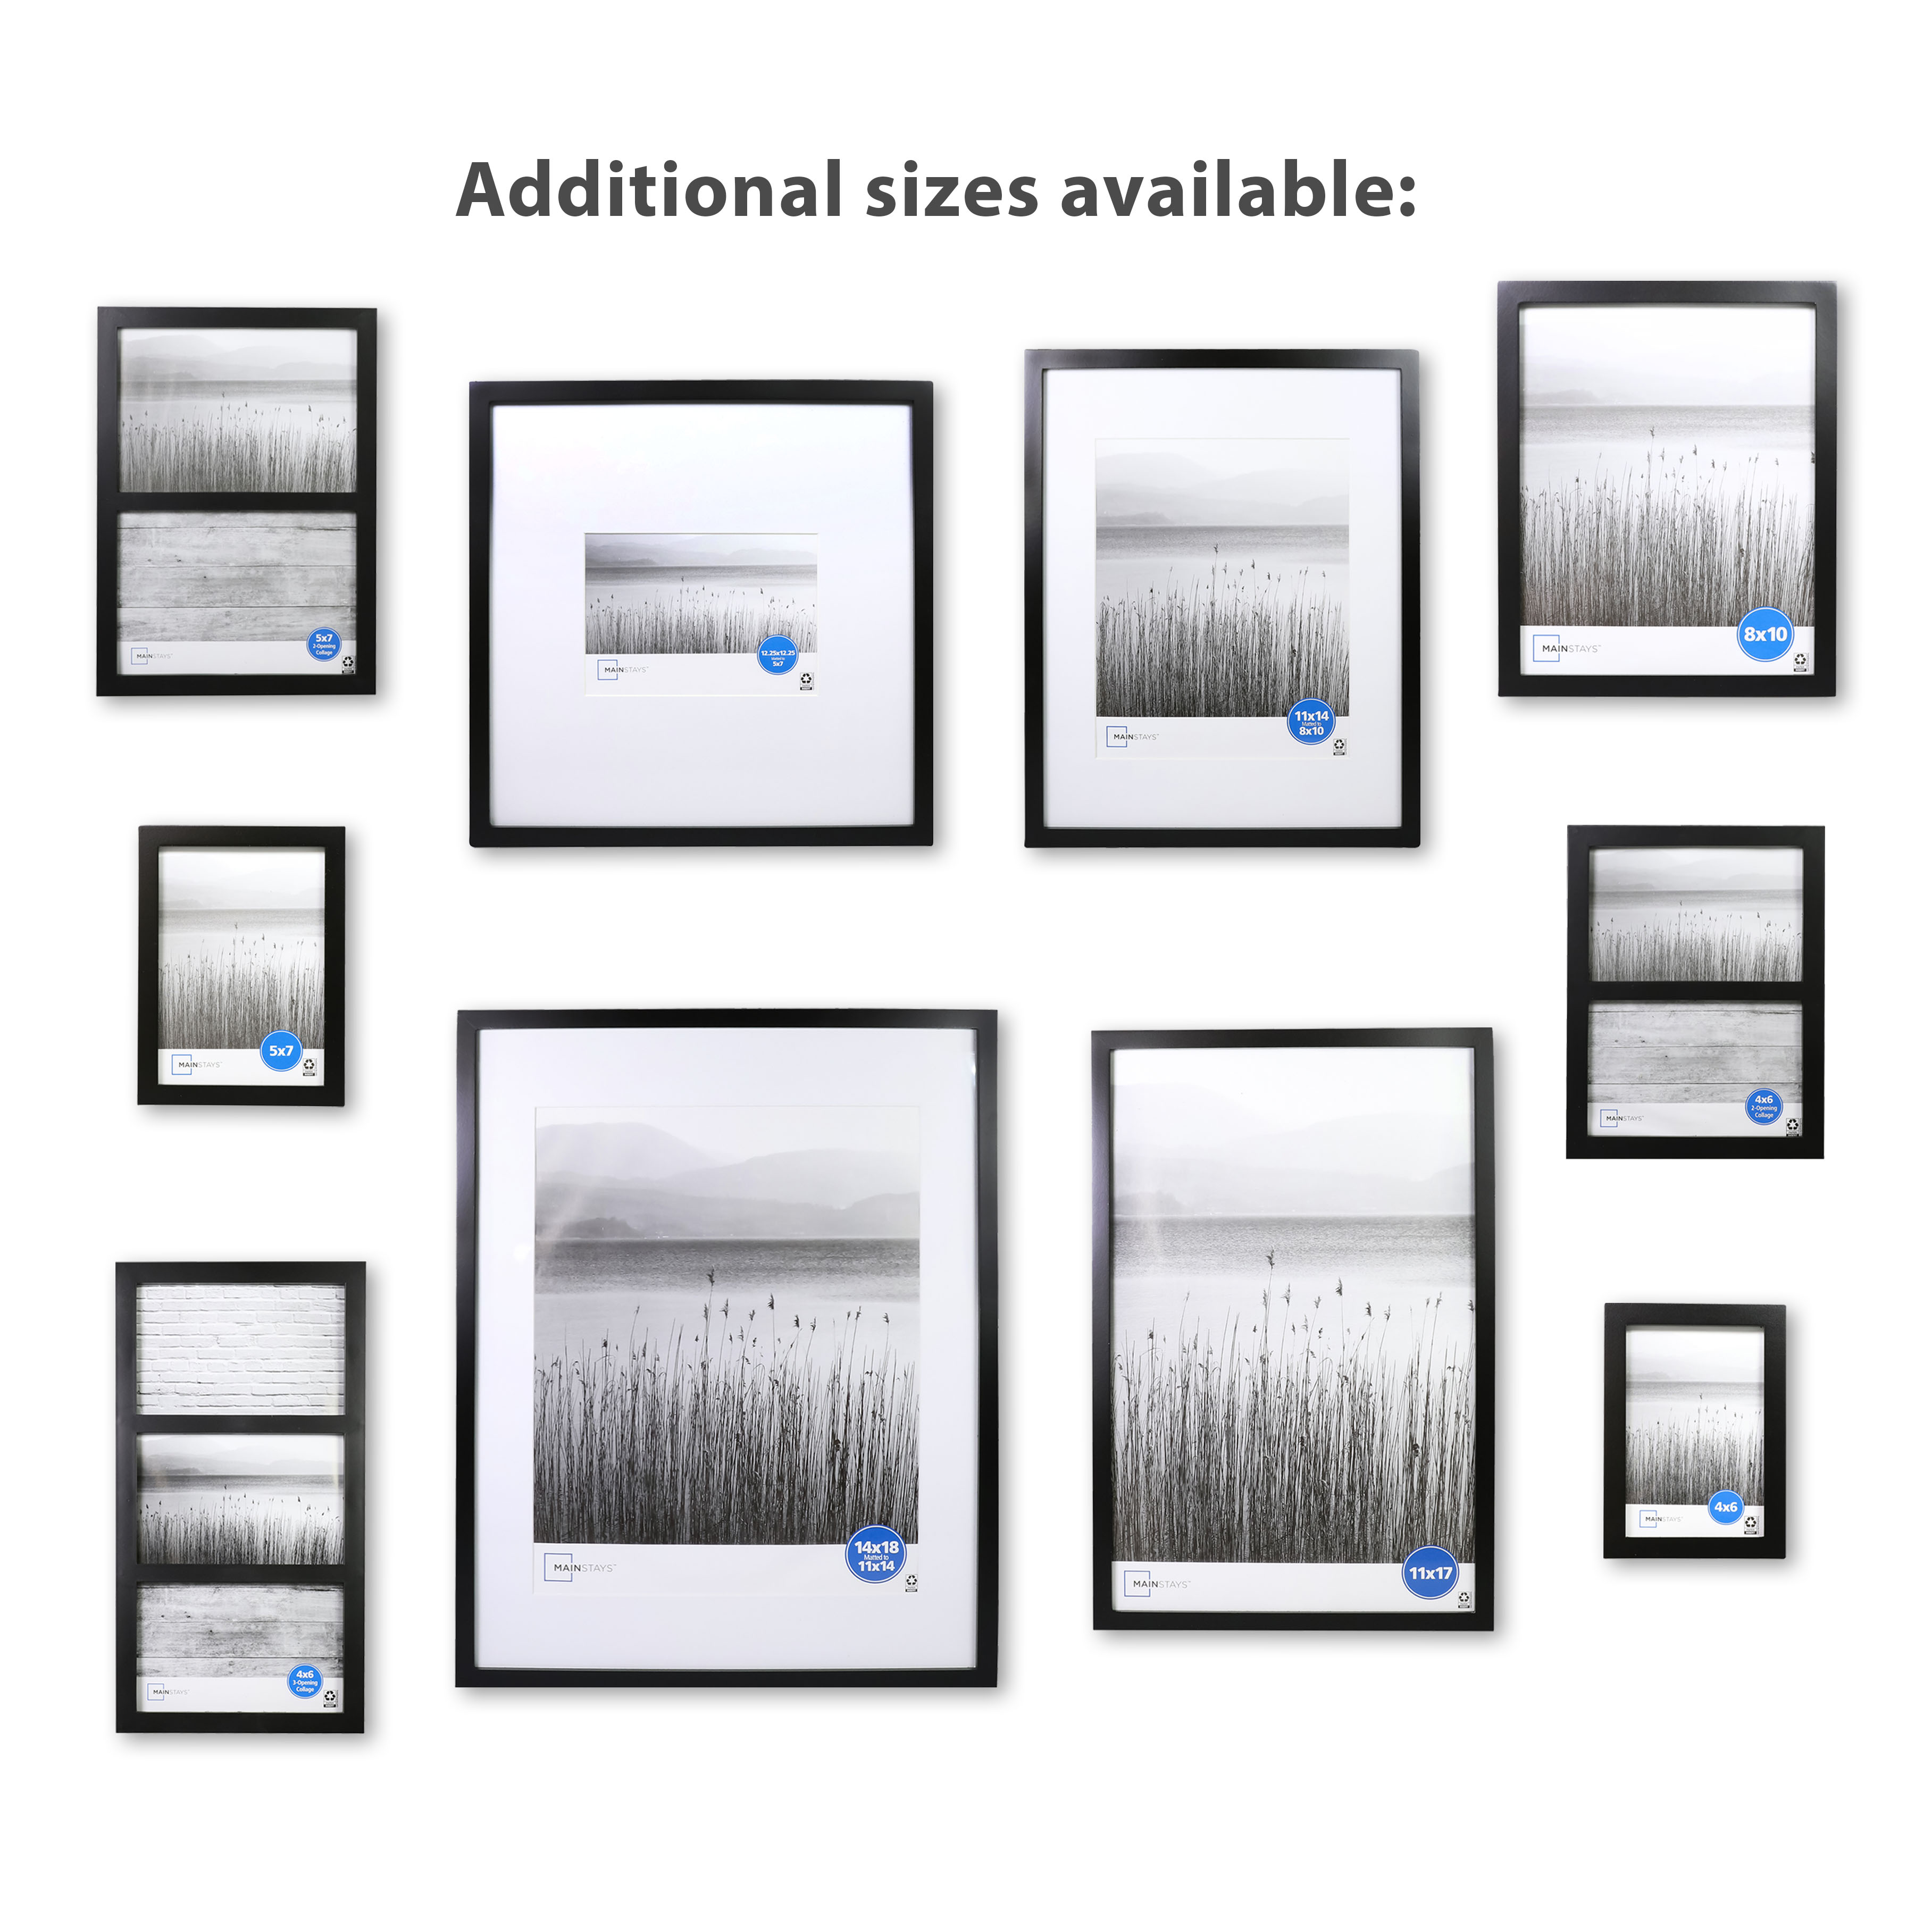 Mainstays 12.25x12.25 Matted to 5x7 Linear Gallery Wall Picture Frame, Set of 3 - image 4 of 8